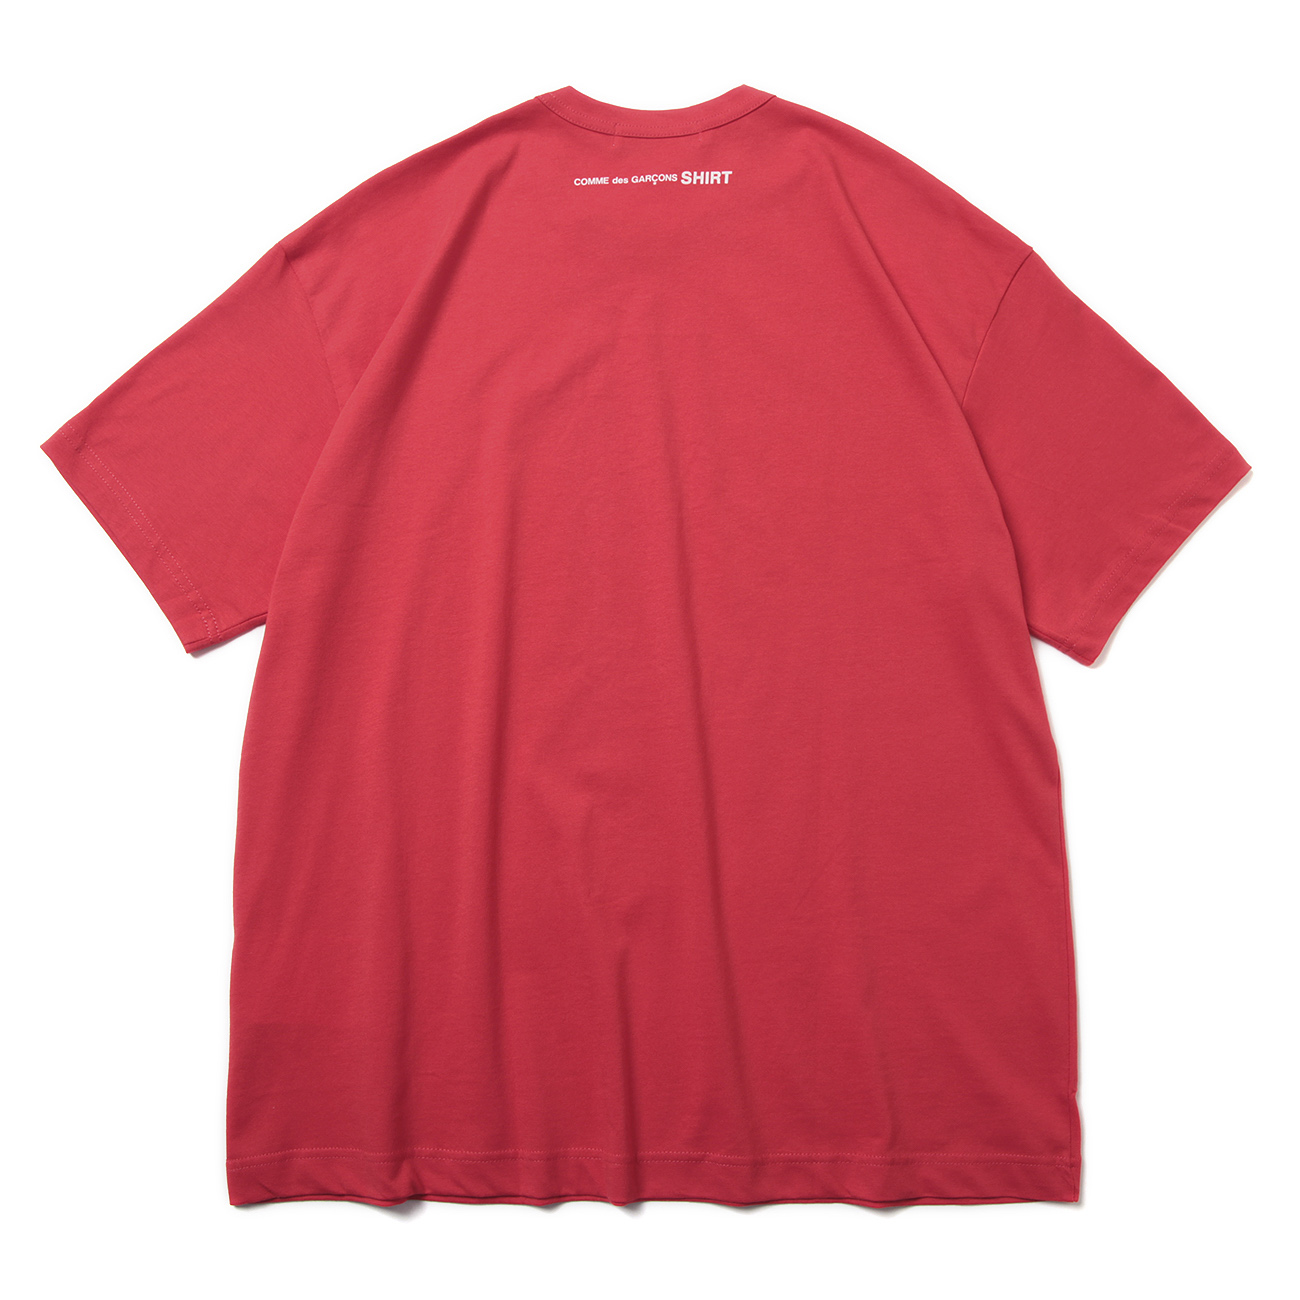 cotton jersey plain 165gr with CDG SHIRT logo back - Red